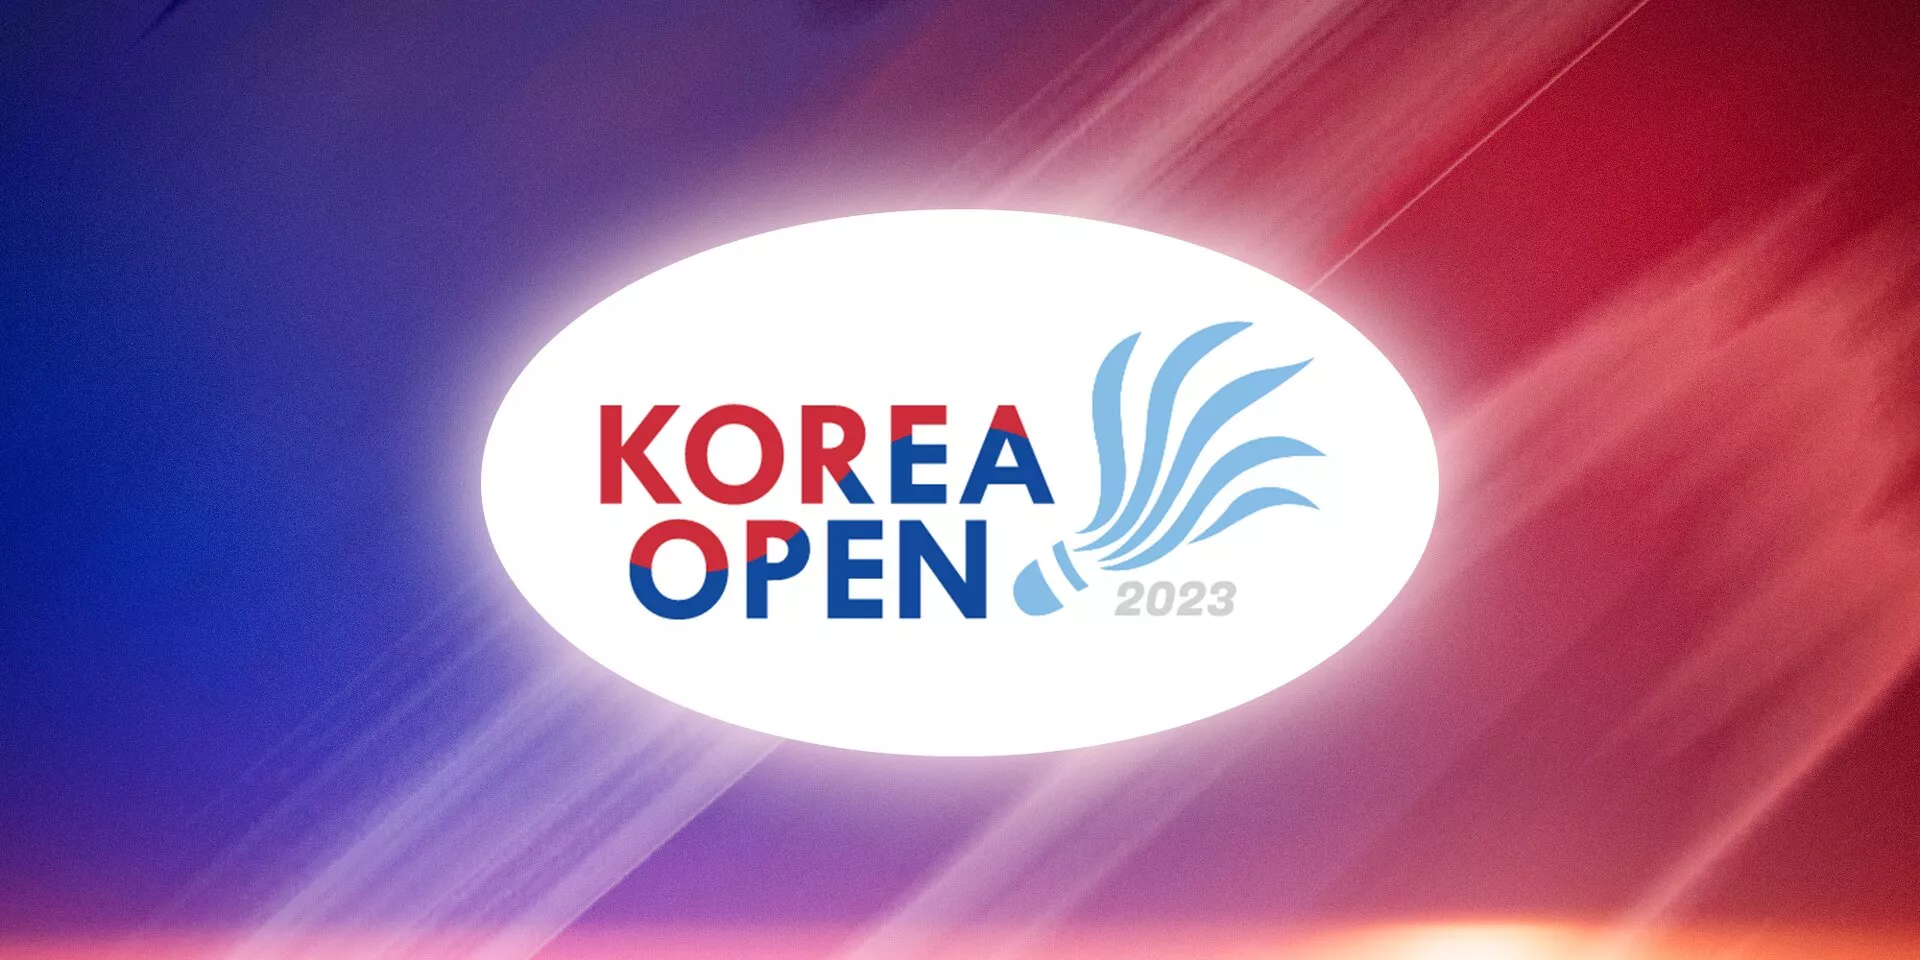 Where and how to watch Korea Open 2023 live in India?